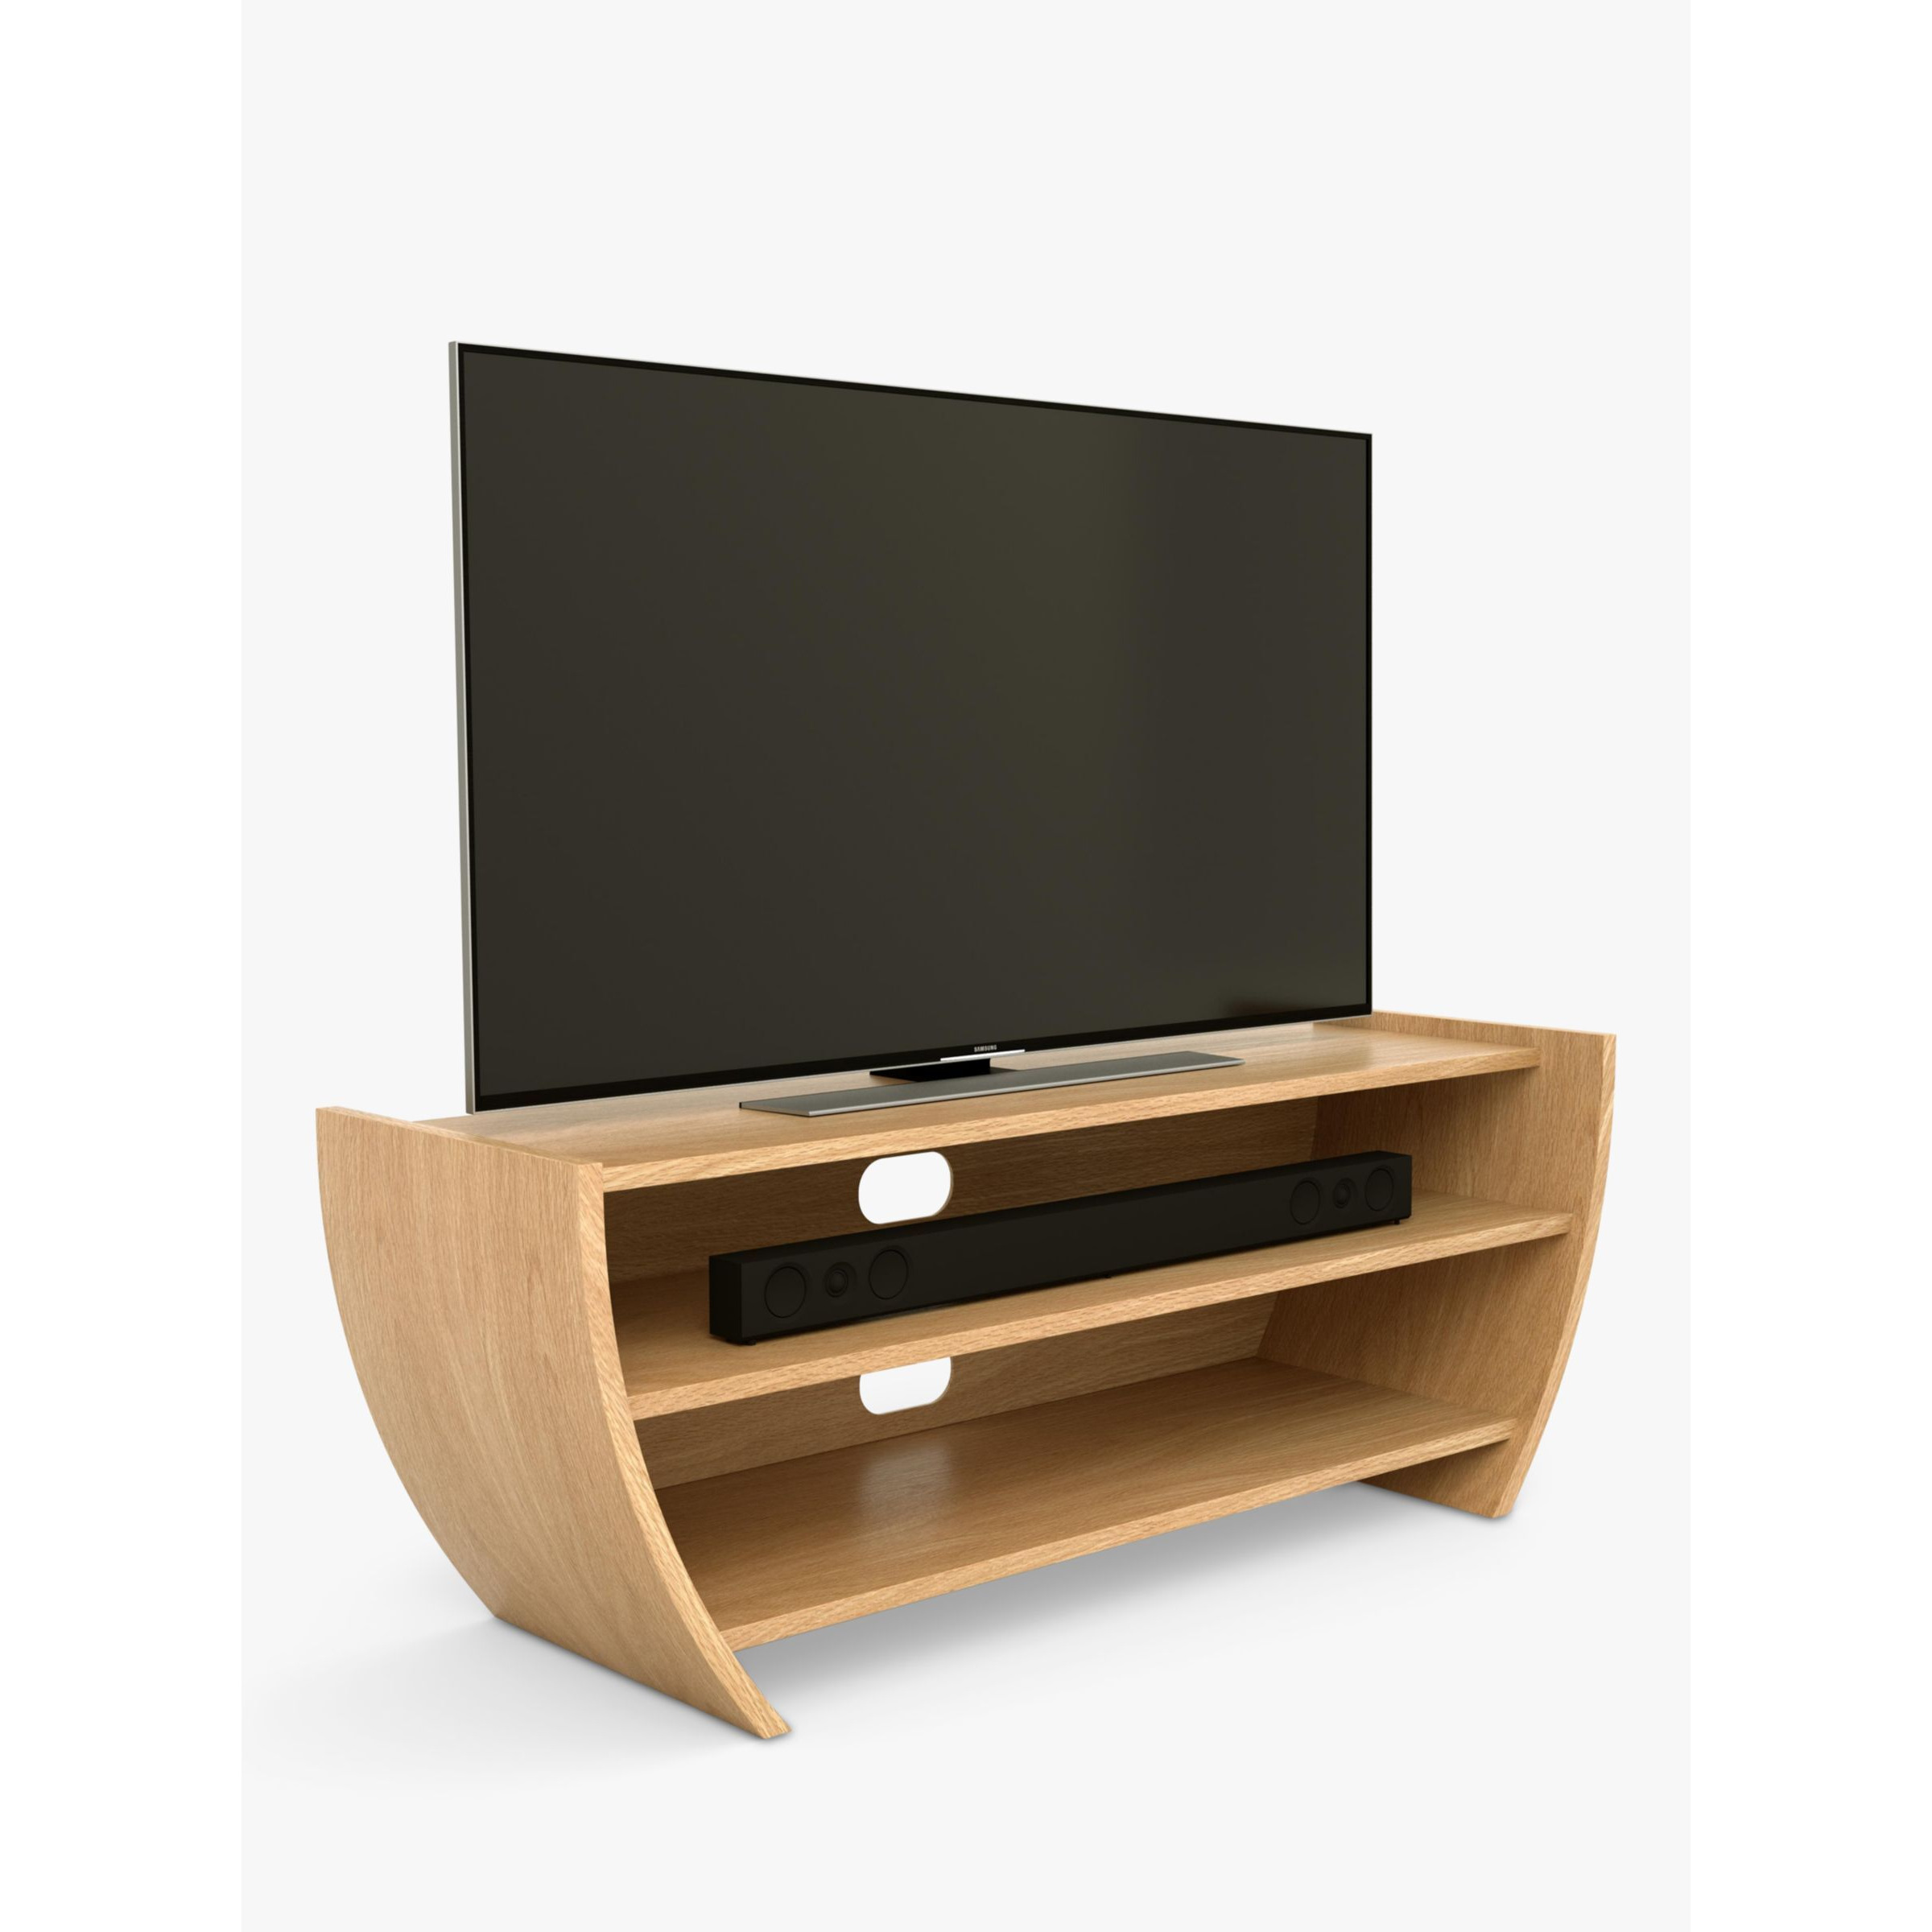 "Tom Schneider Layla 125 TV Stand for TVs up to 55""" - image 1